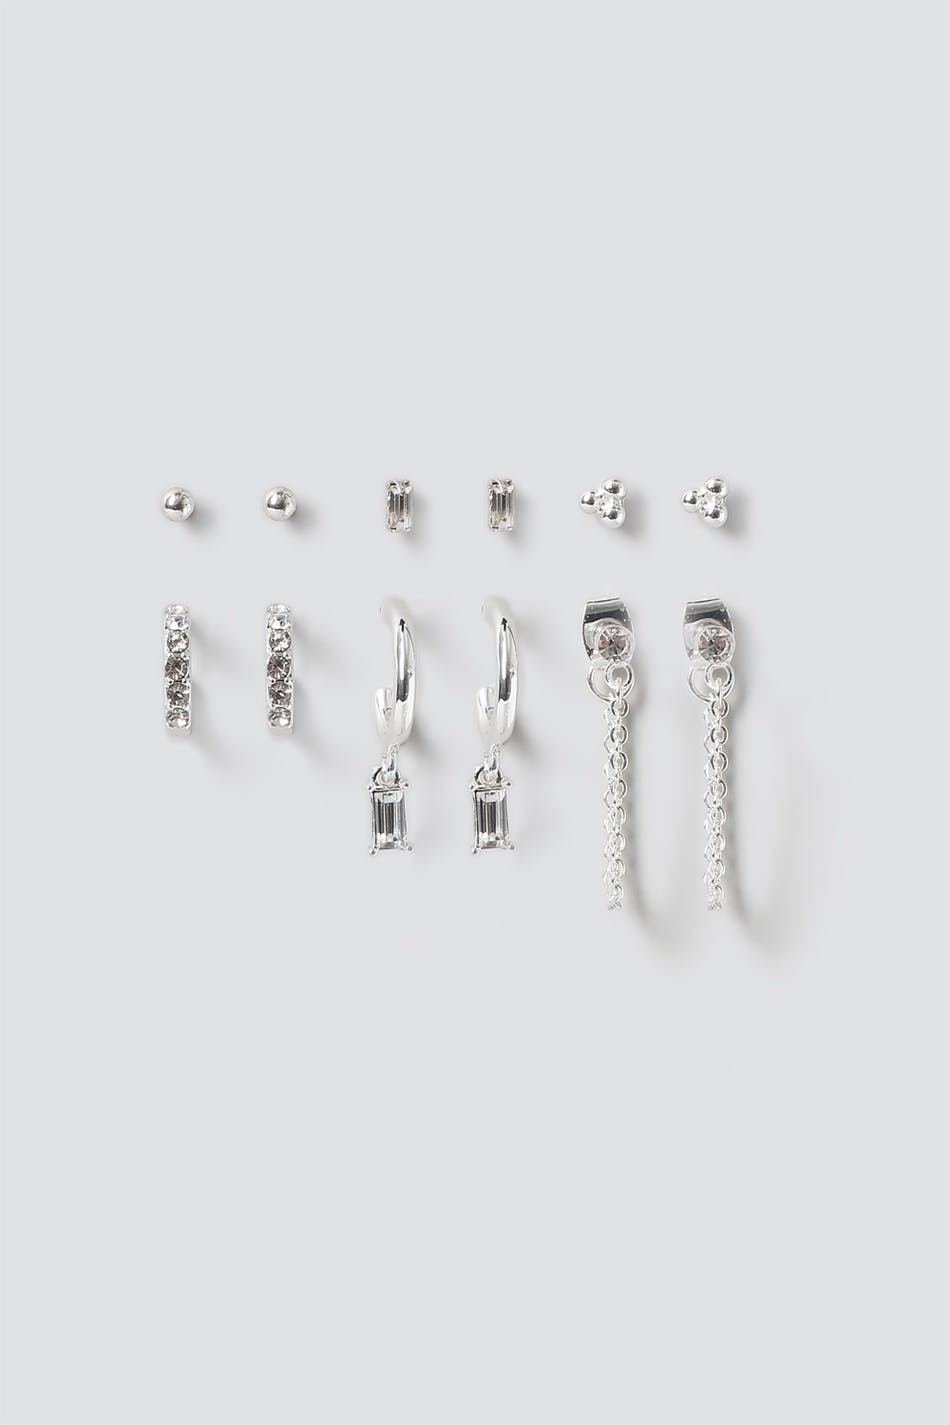 Gina Tricot Baguette and Pave Crystal Earring Pack in Silver one size  Crystal